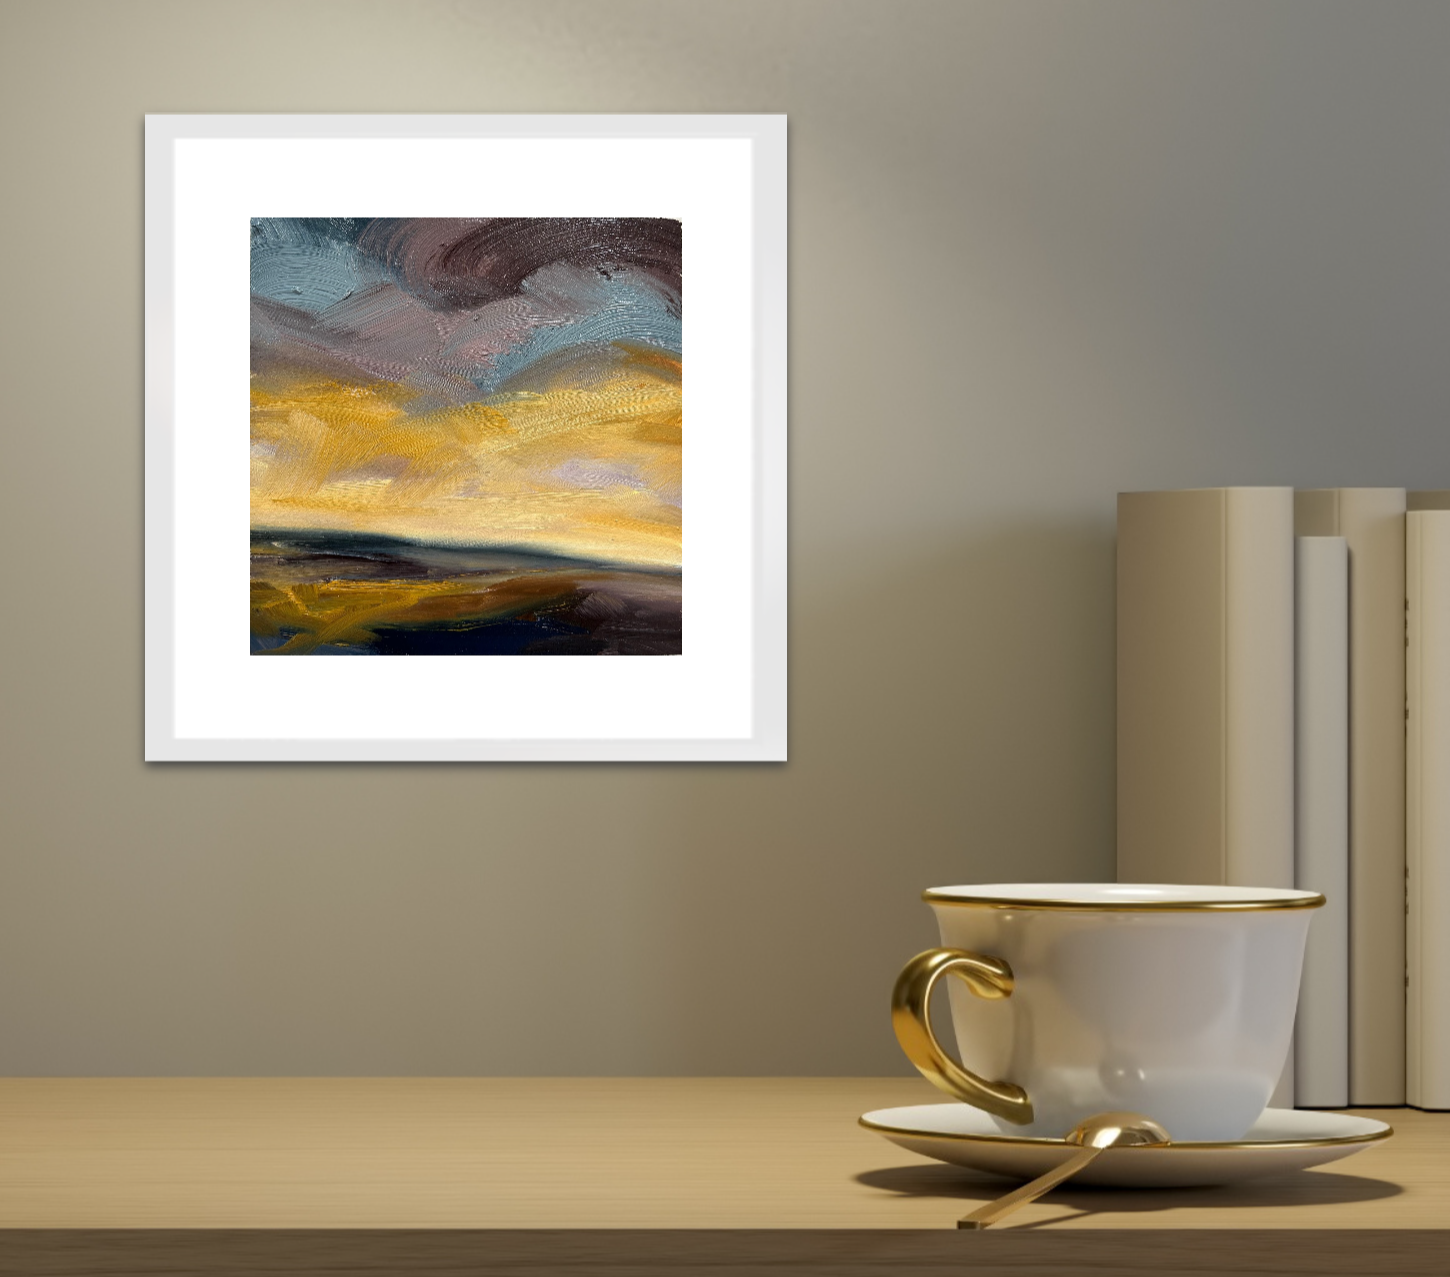 Glowing Light Original Oil On Paper Landscape Painting In Room Setting 1